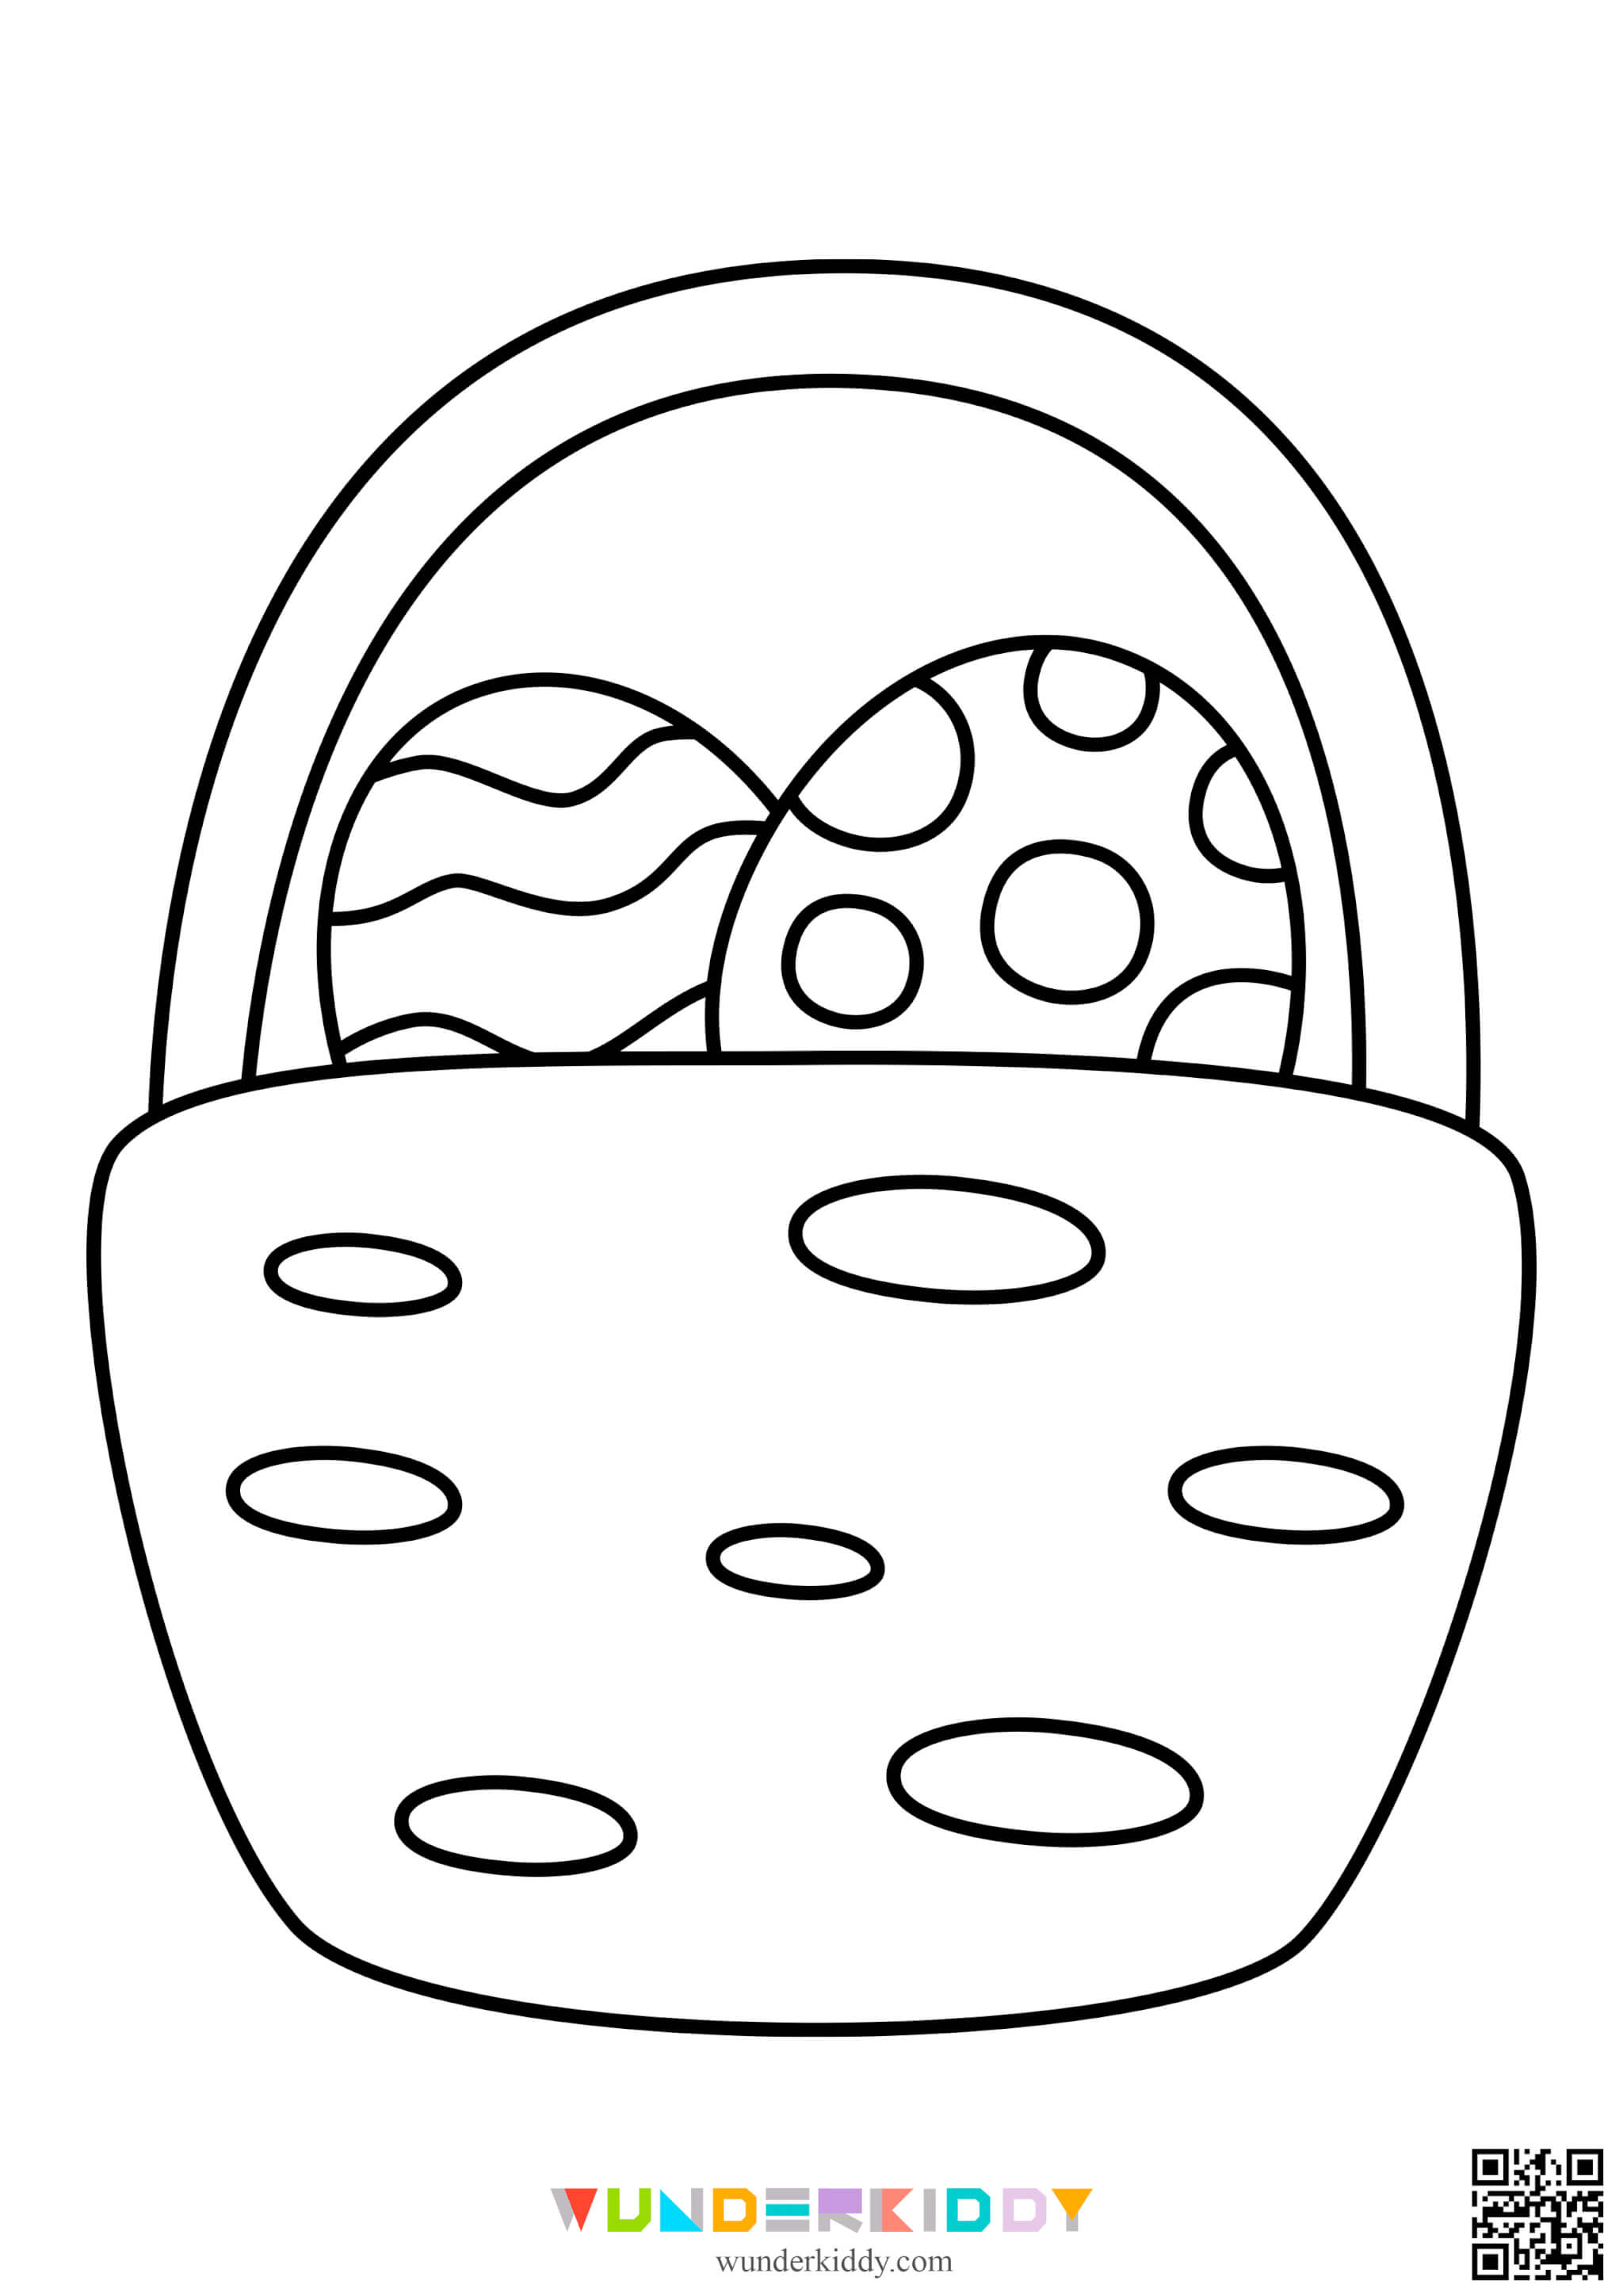 Easter Eggs Coloring Pages - Image 5